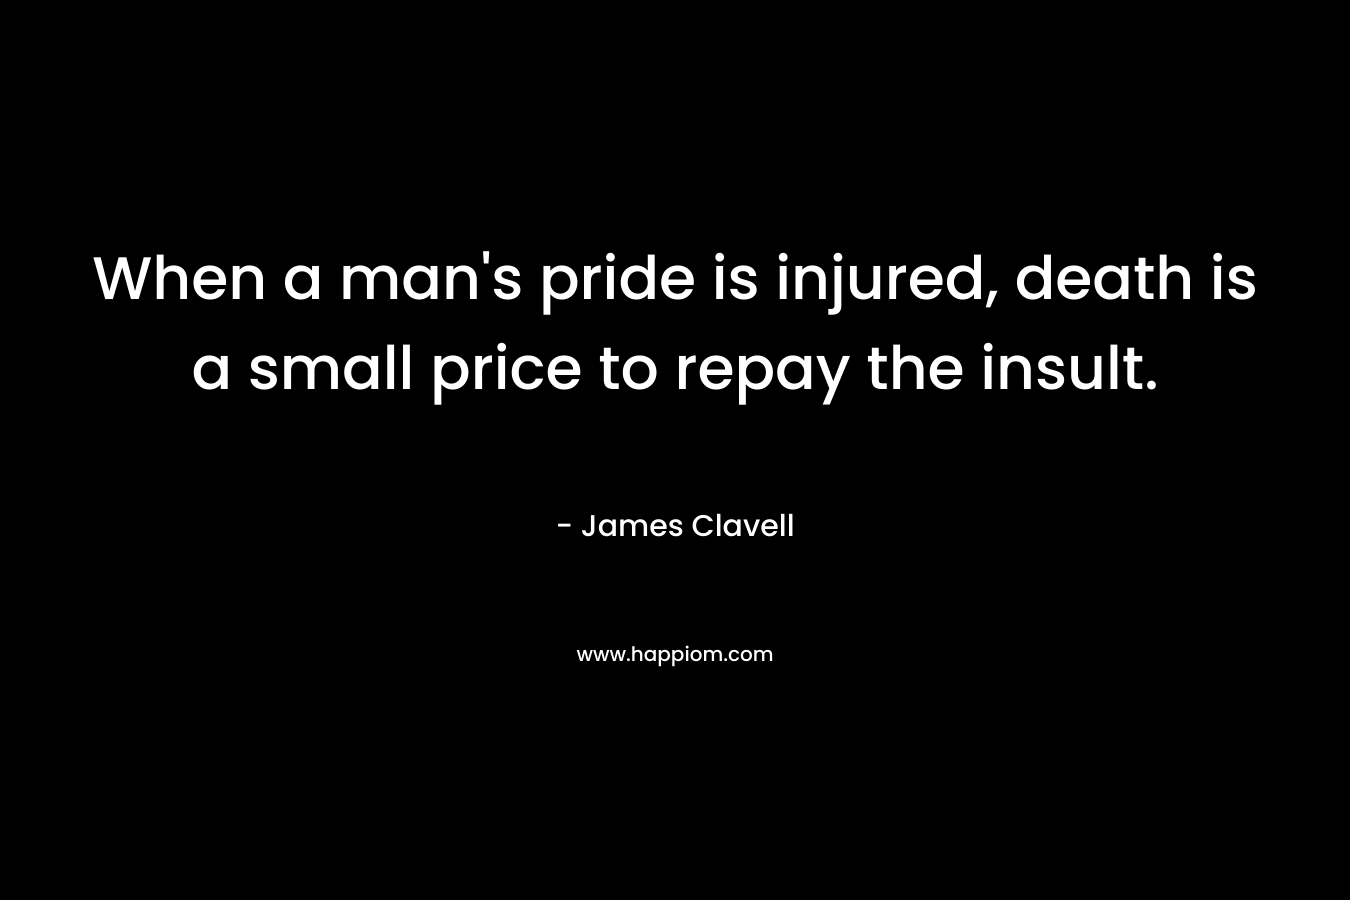 When a man’s pride is injured, death is a small price to repay the insult. – James Clavell